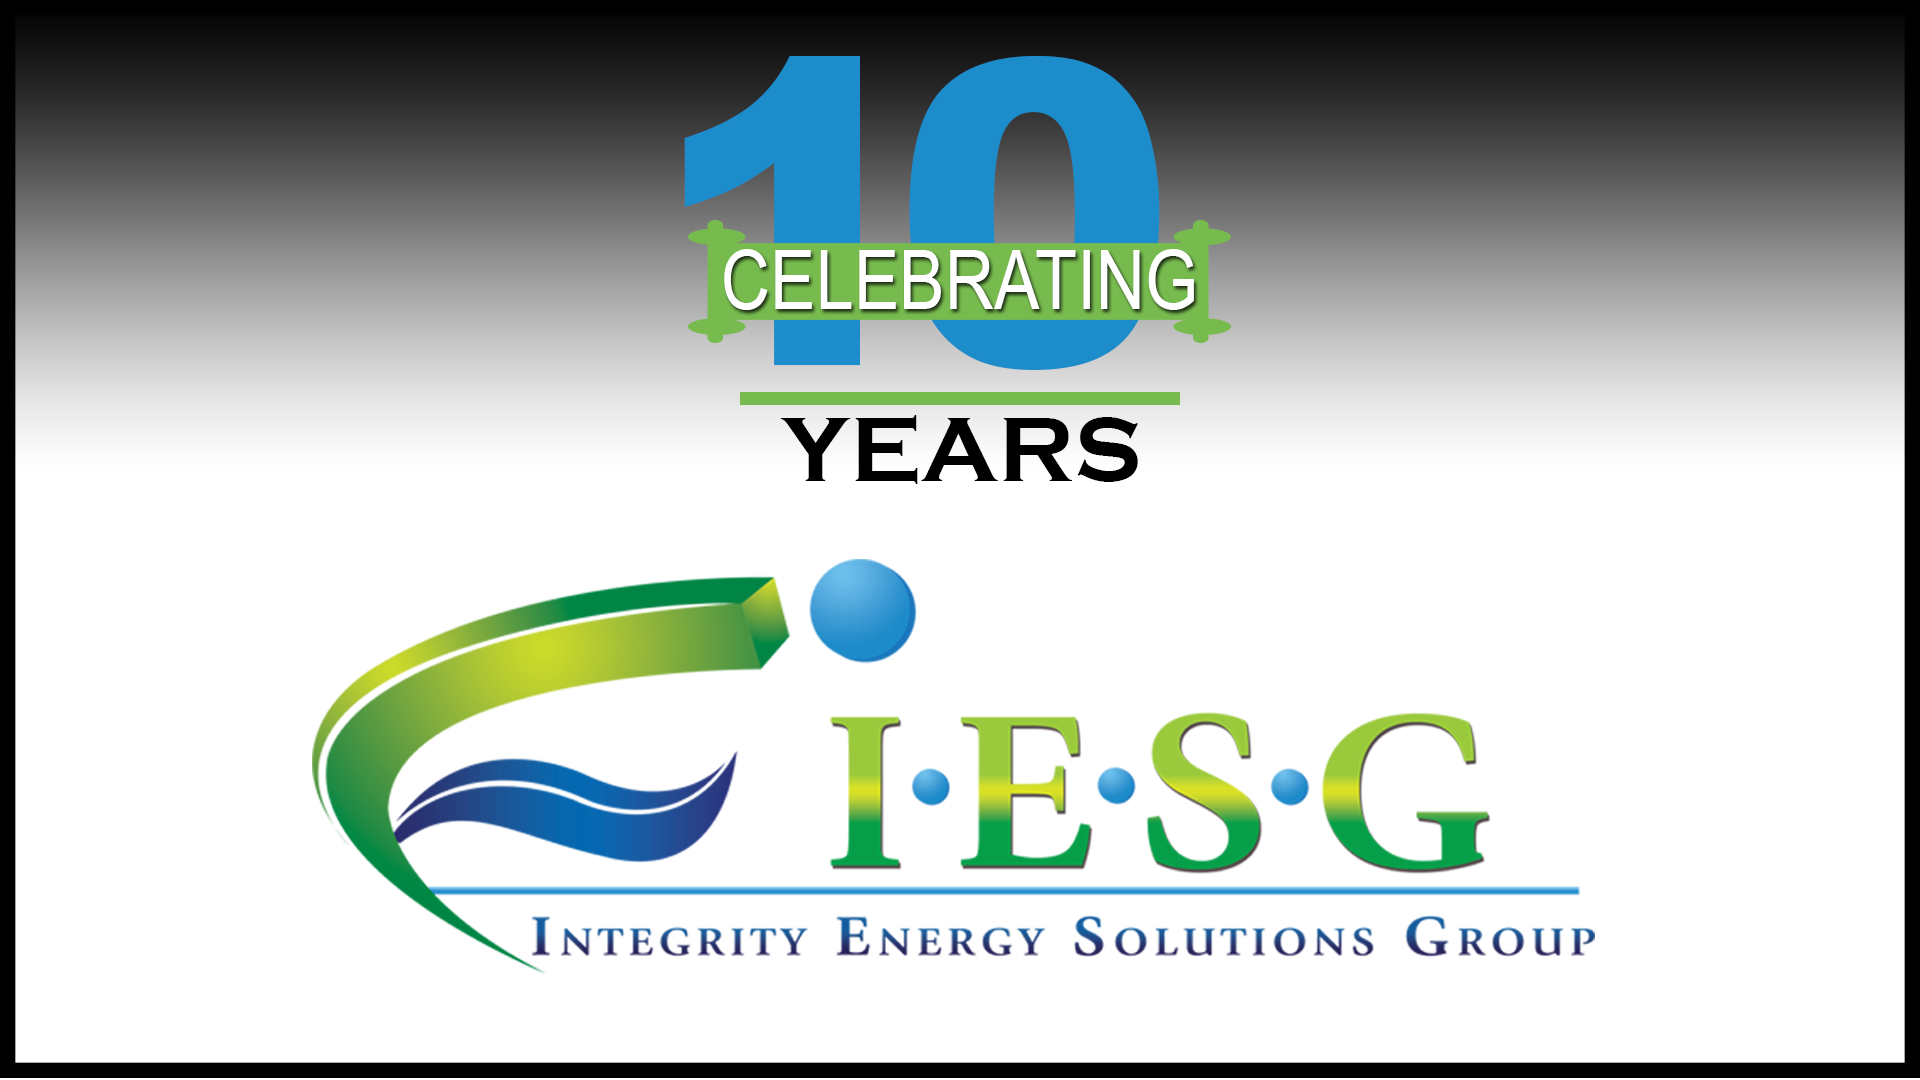 IESG Celebrating 10 Years of Business